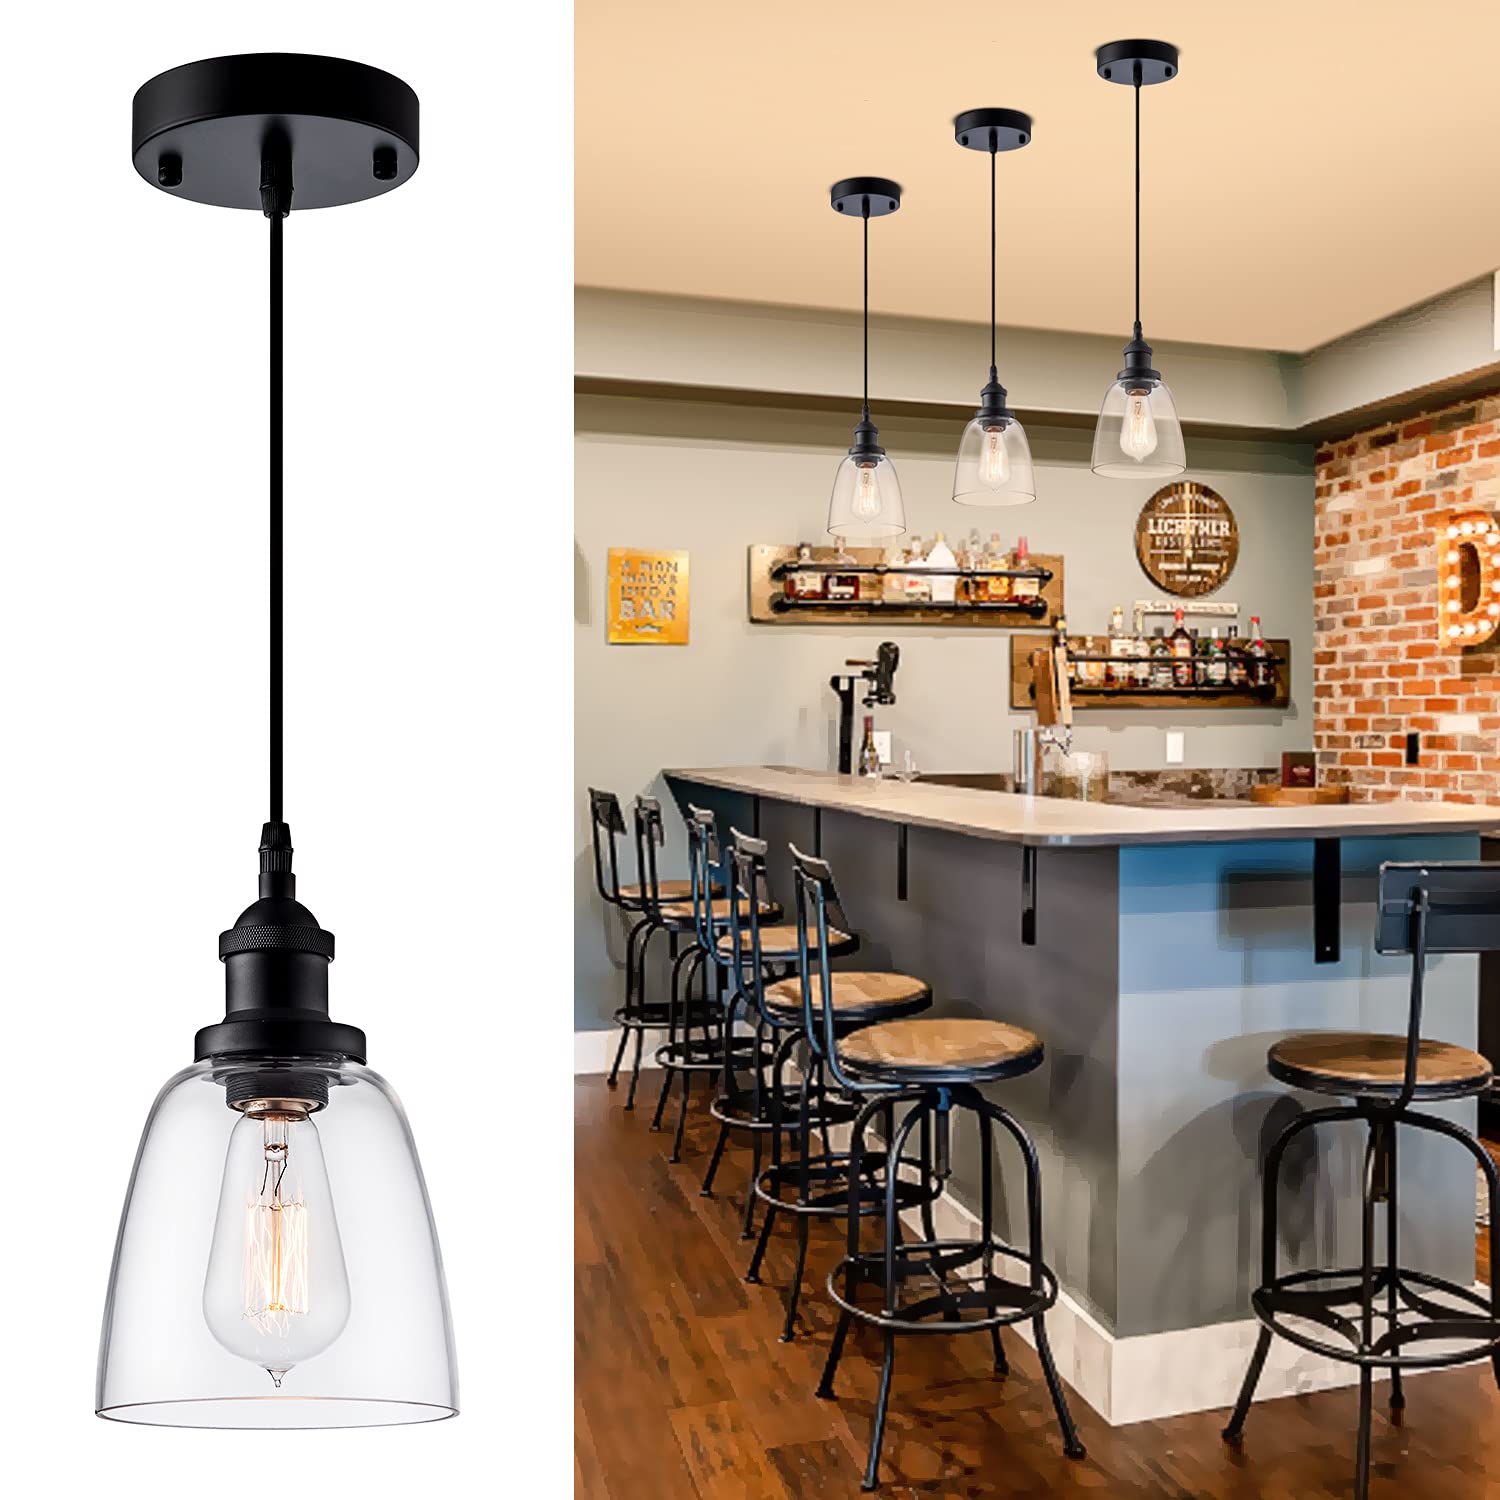 IMPIOIO Industrial Pendant Light Fixture Over Sink Modern clear glass Hanging Lighting Adjustable cord for Kitchen Island Dining